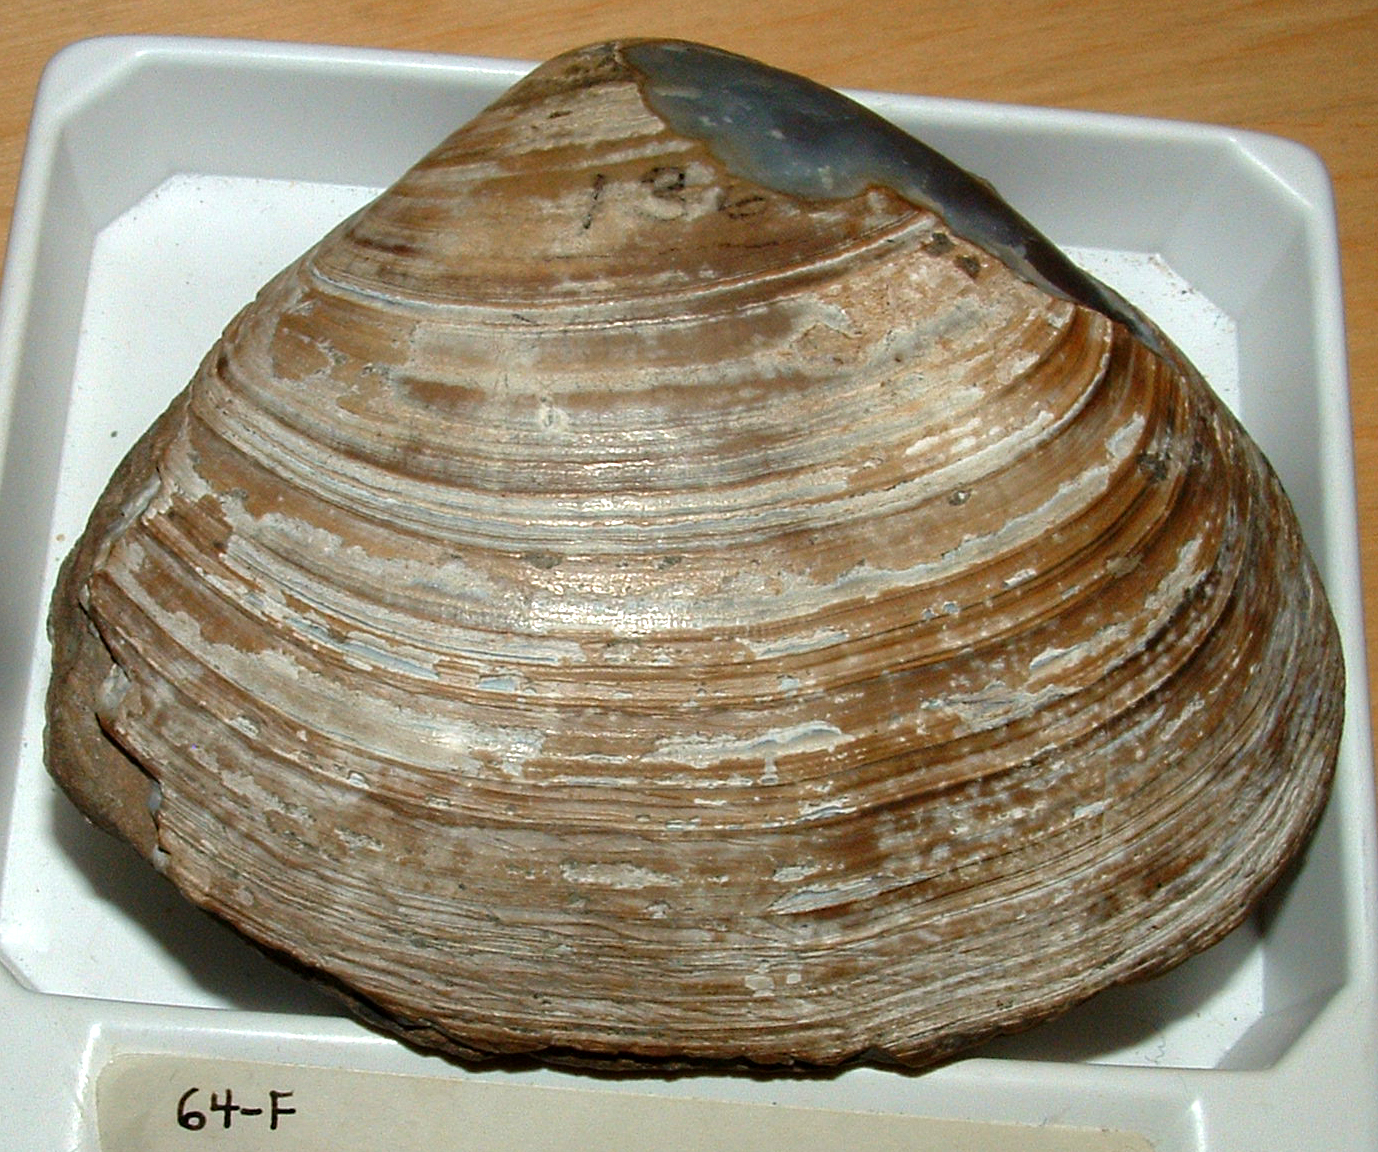 fossil clam